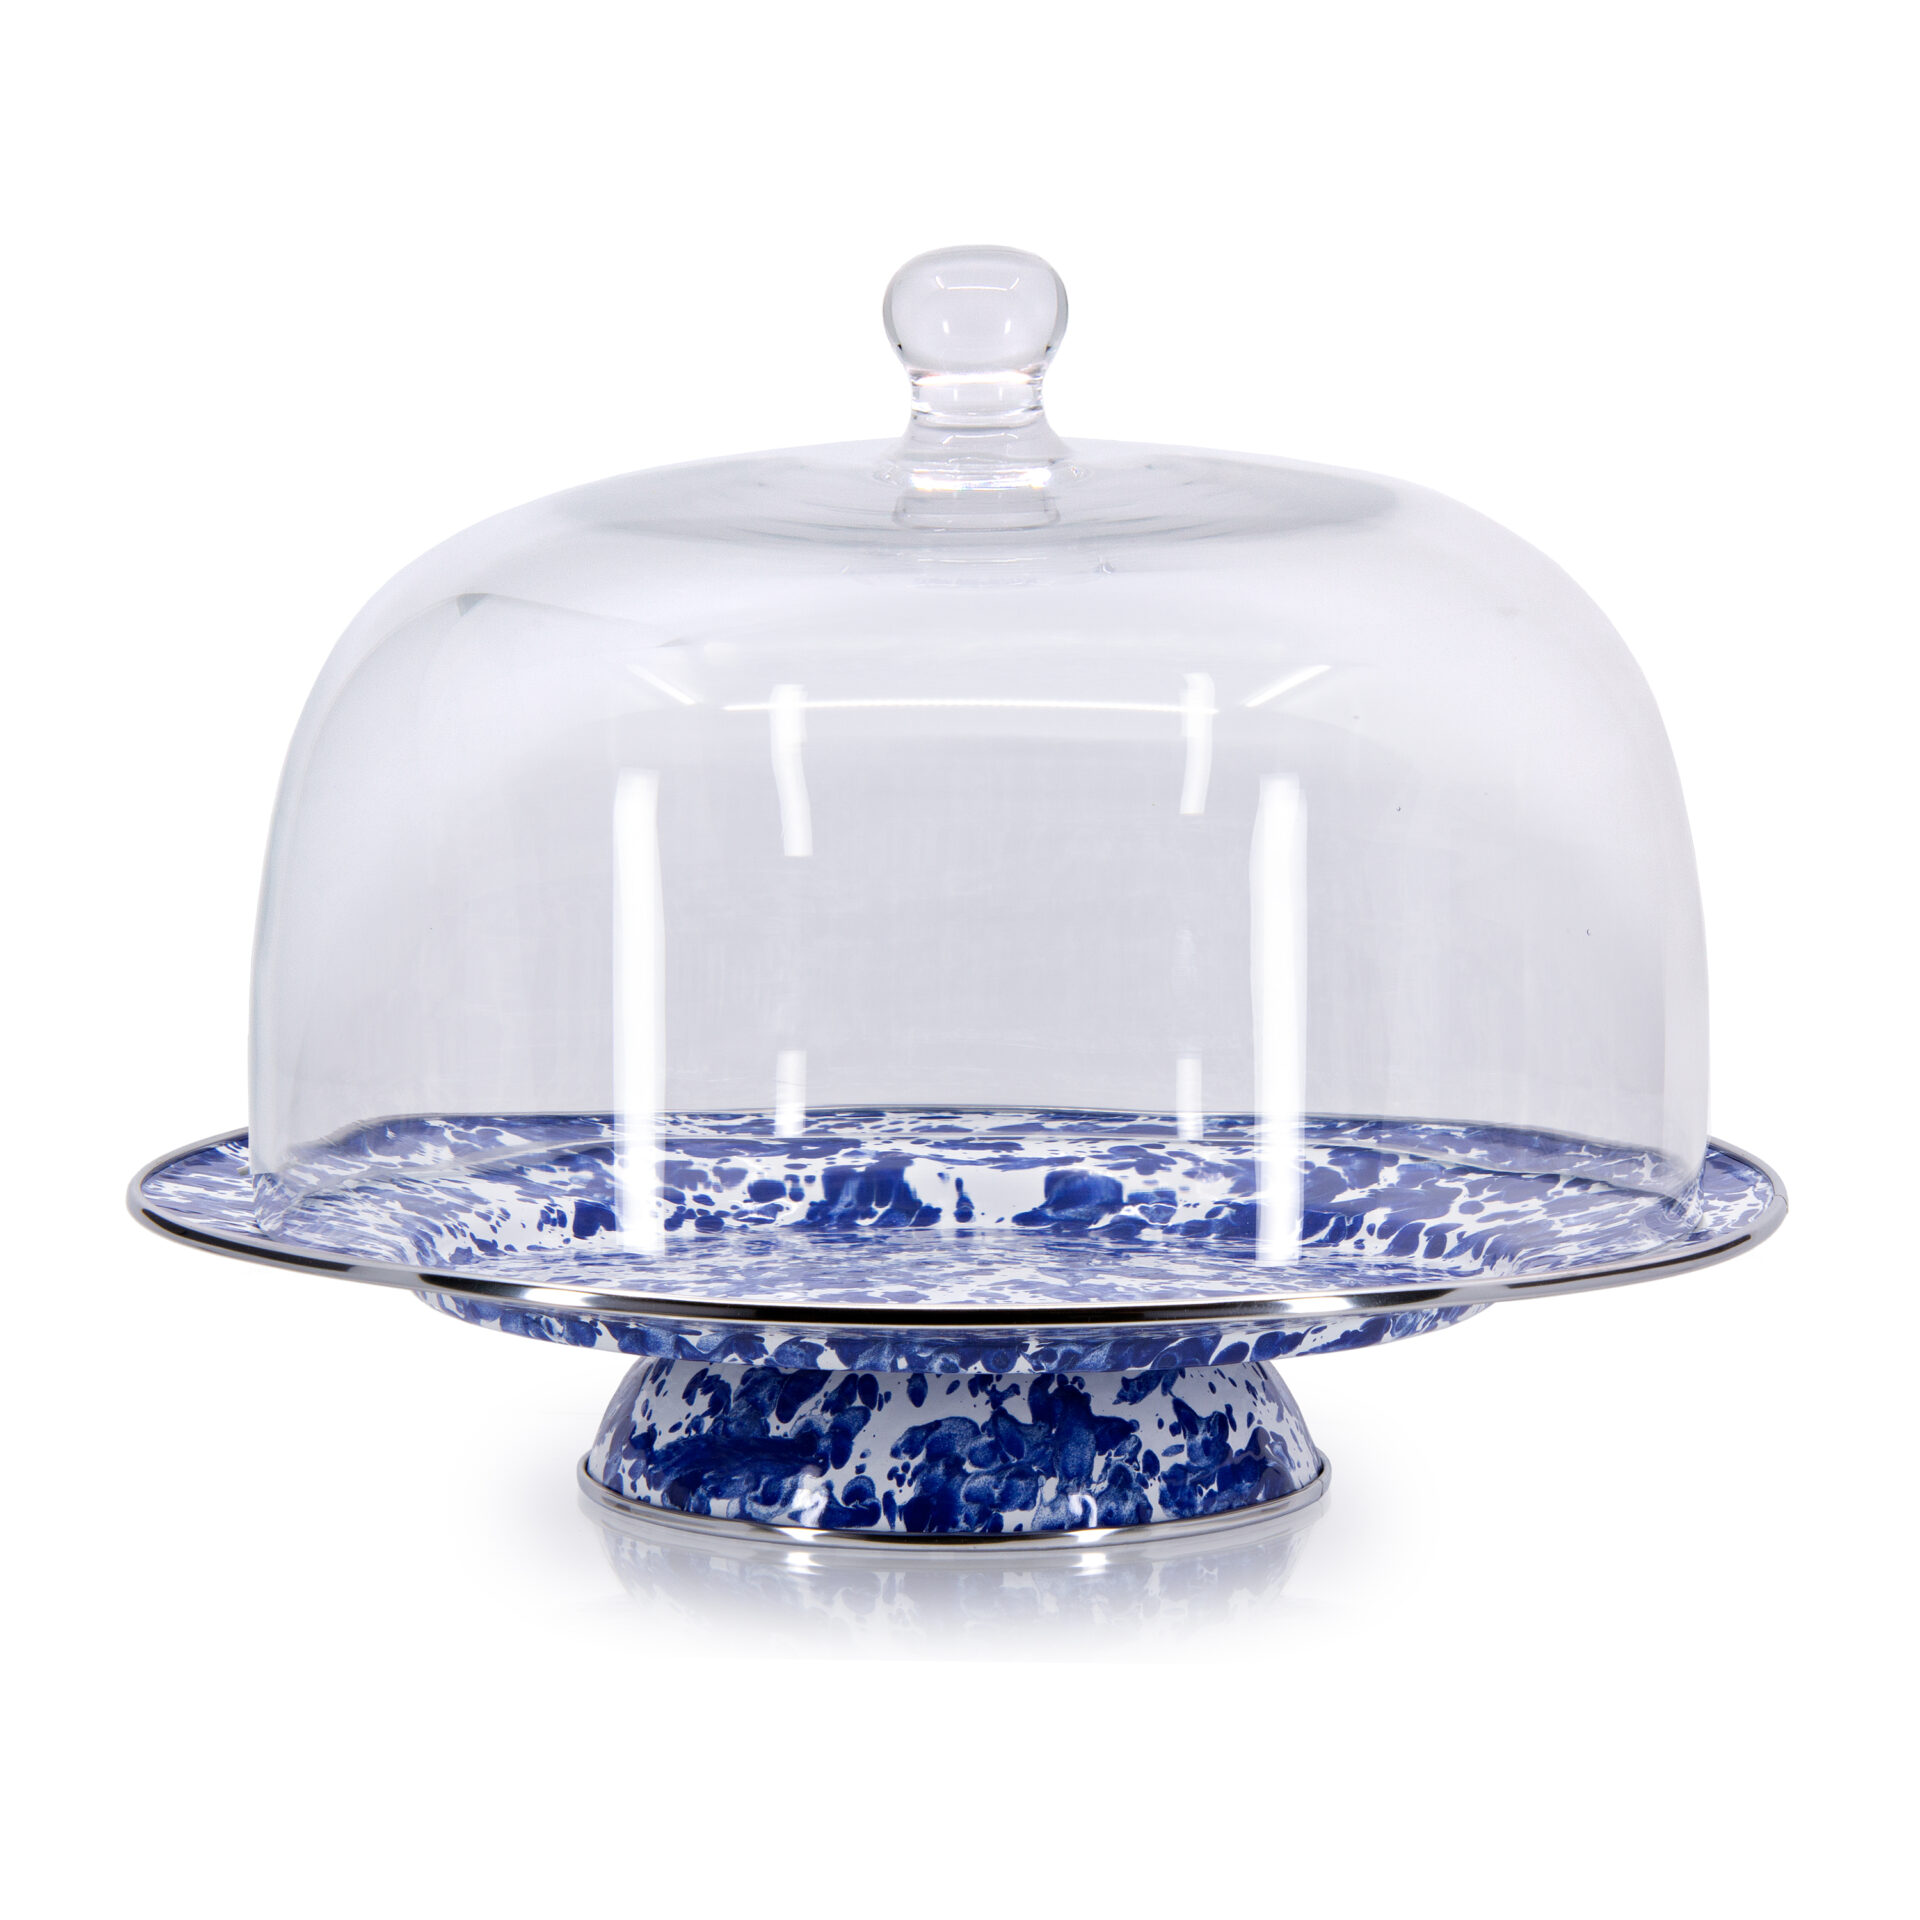 holiday baking supplies:  an image of a cobalt blue patterned cake stand with a clear lid 